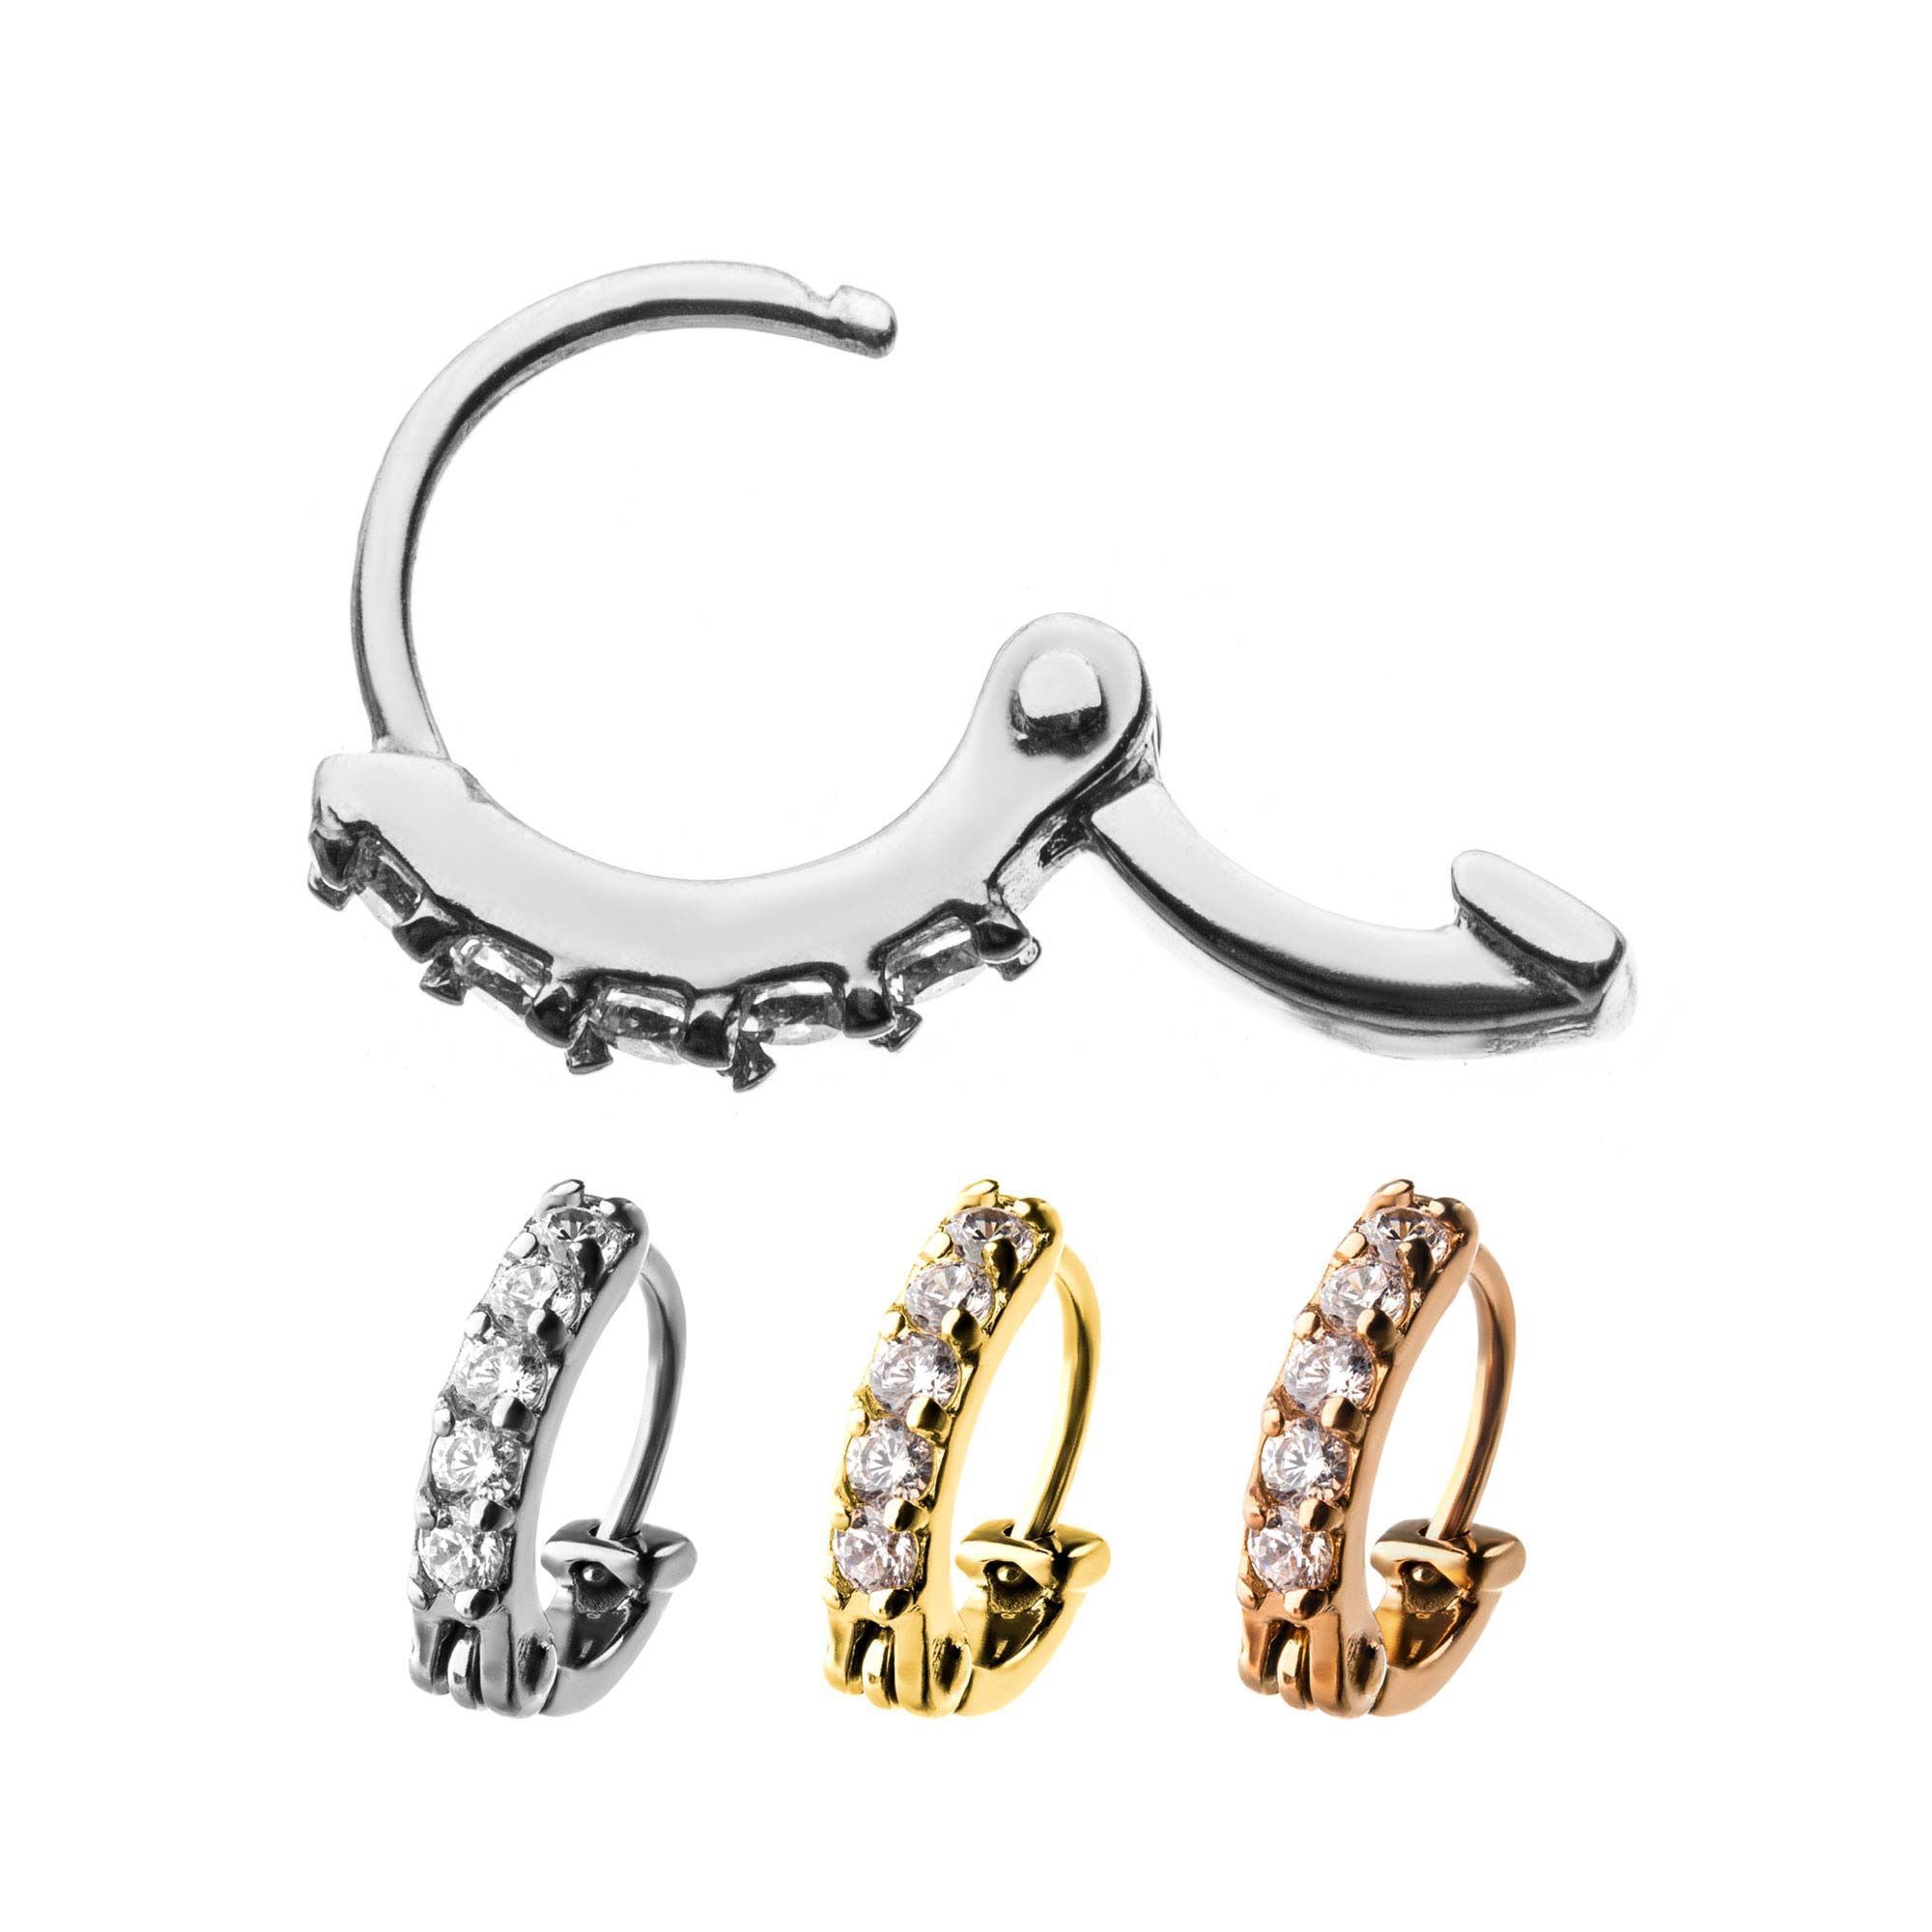 Clicker - Cartilage | Septum 2.4mm thick design and 6mm Pin Clear Gems Hinged Cartilage Earring sbvsgrhec815 - 1 Piece -Rebel Bod-RebelBod